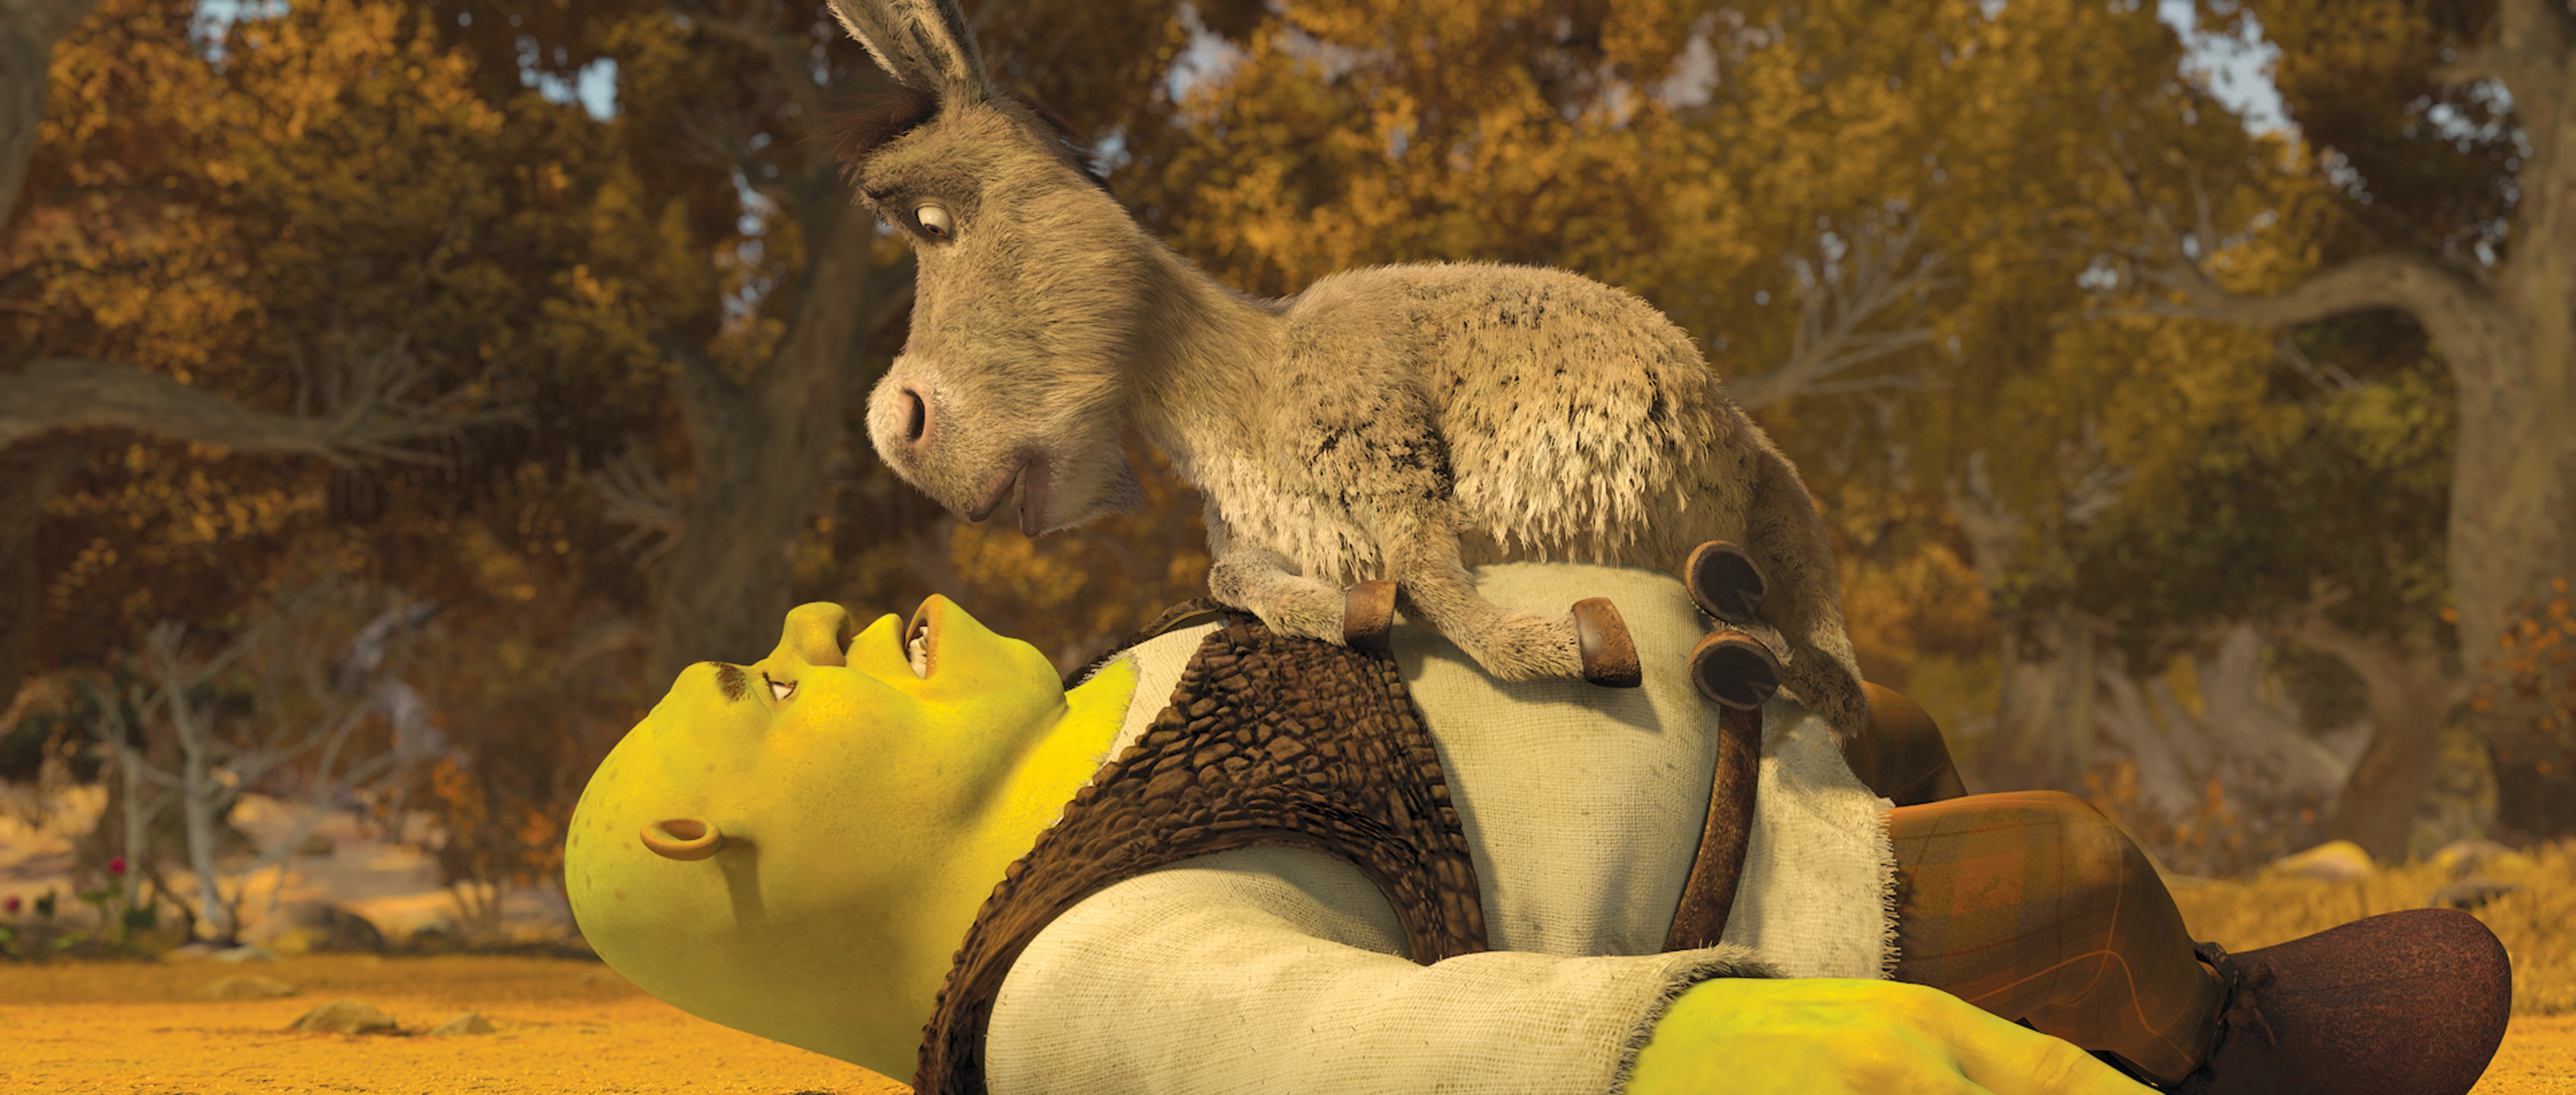 Shrek 5 gets new release date and cast for sequel